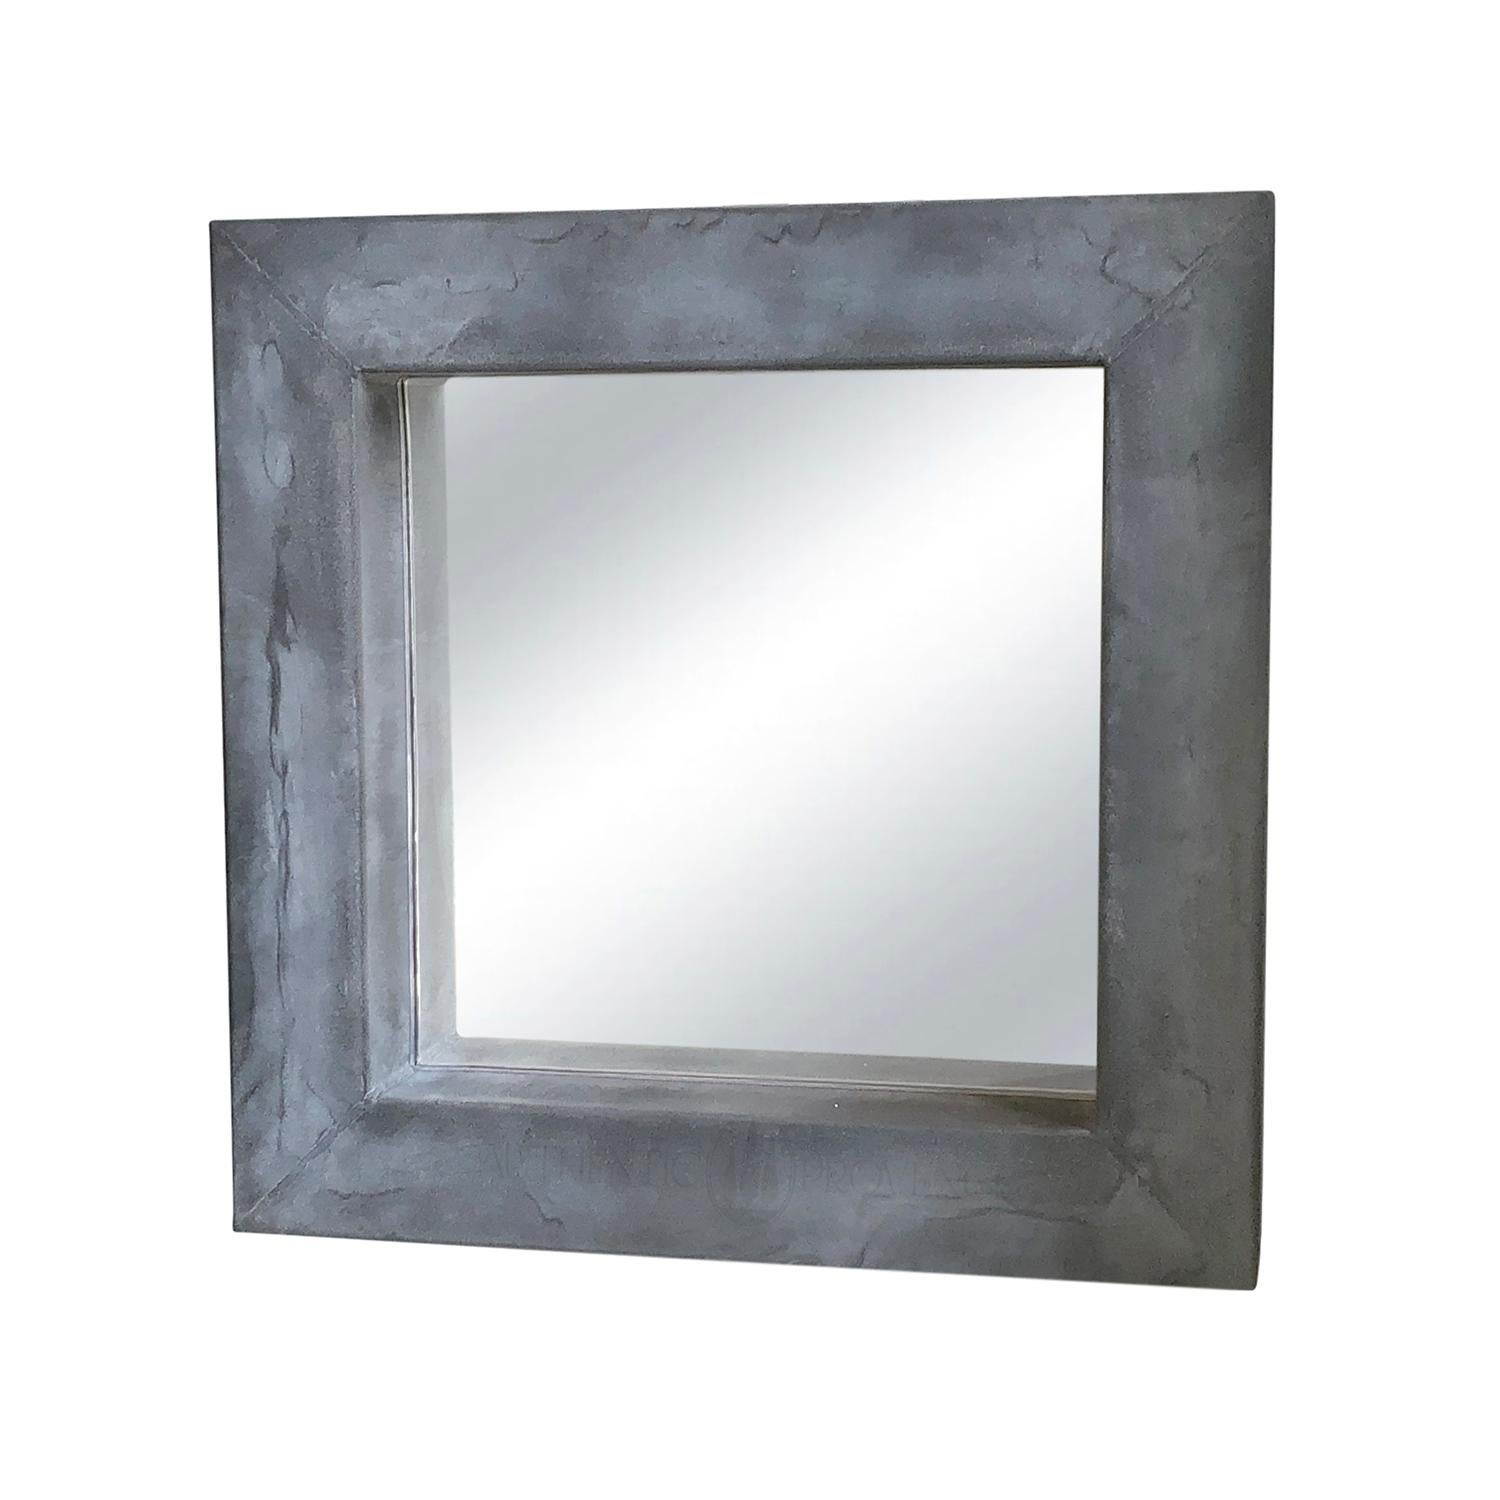 Our beautiful grey square Belgian metal mirrors can be used in many ways in a garden or outside space, playing clever tricks with the eye, a mirror can make a space feel bigger and bring light into an enclosed area.